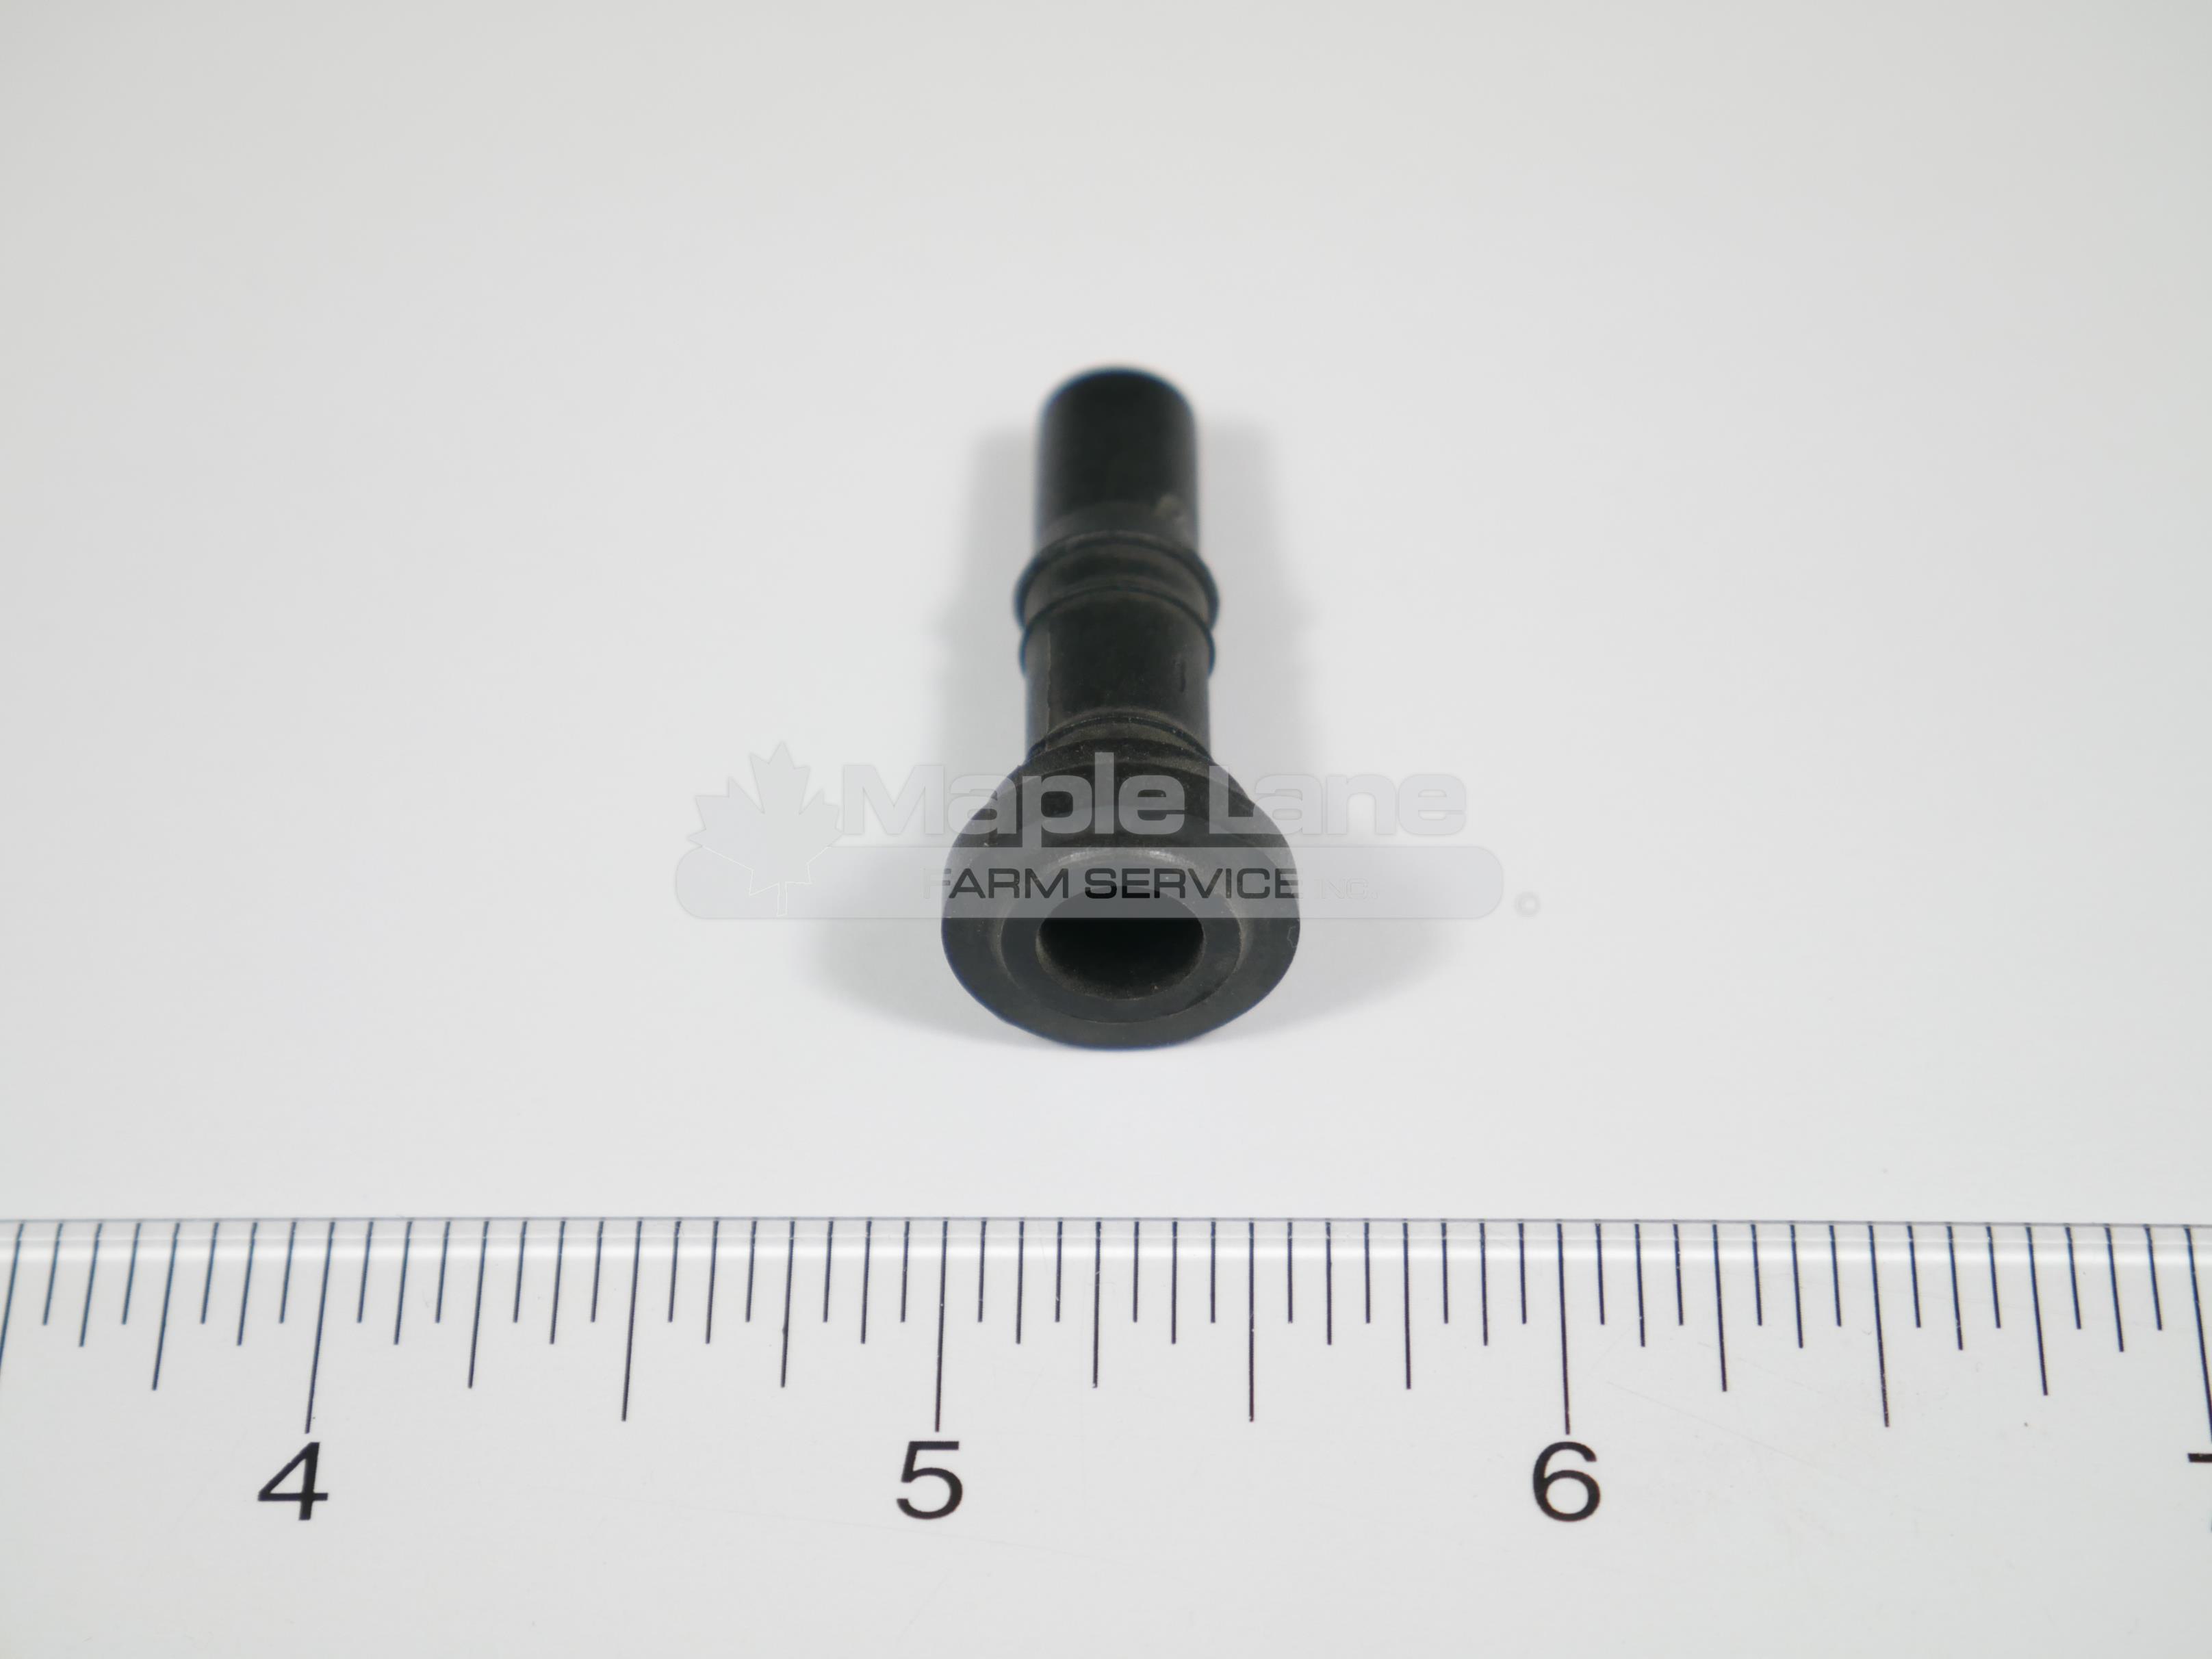 331807 Fitting 5/16" HB 3/8" Nut